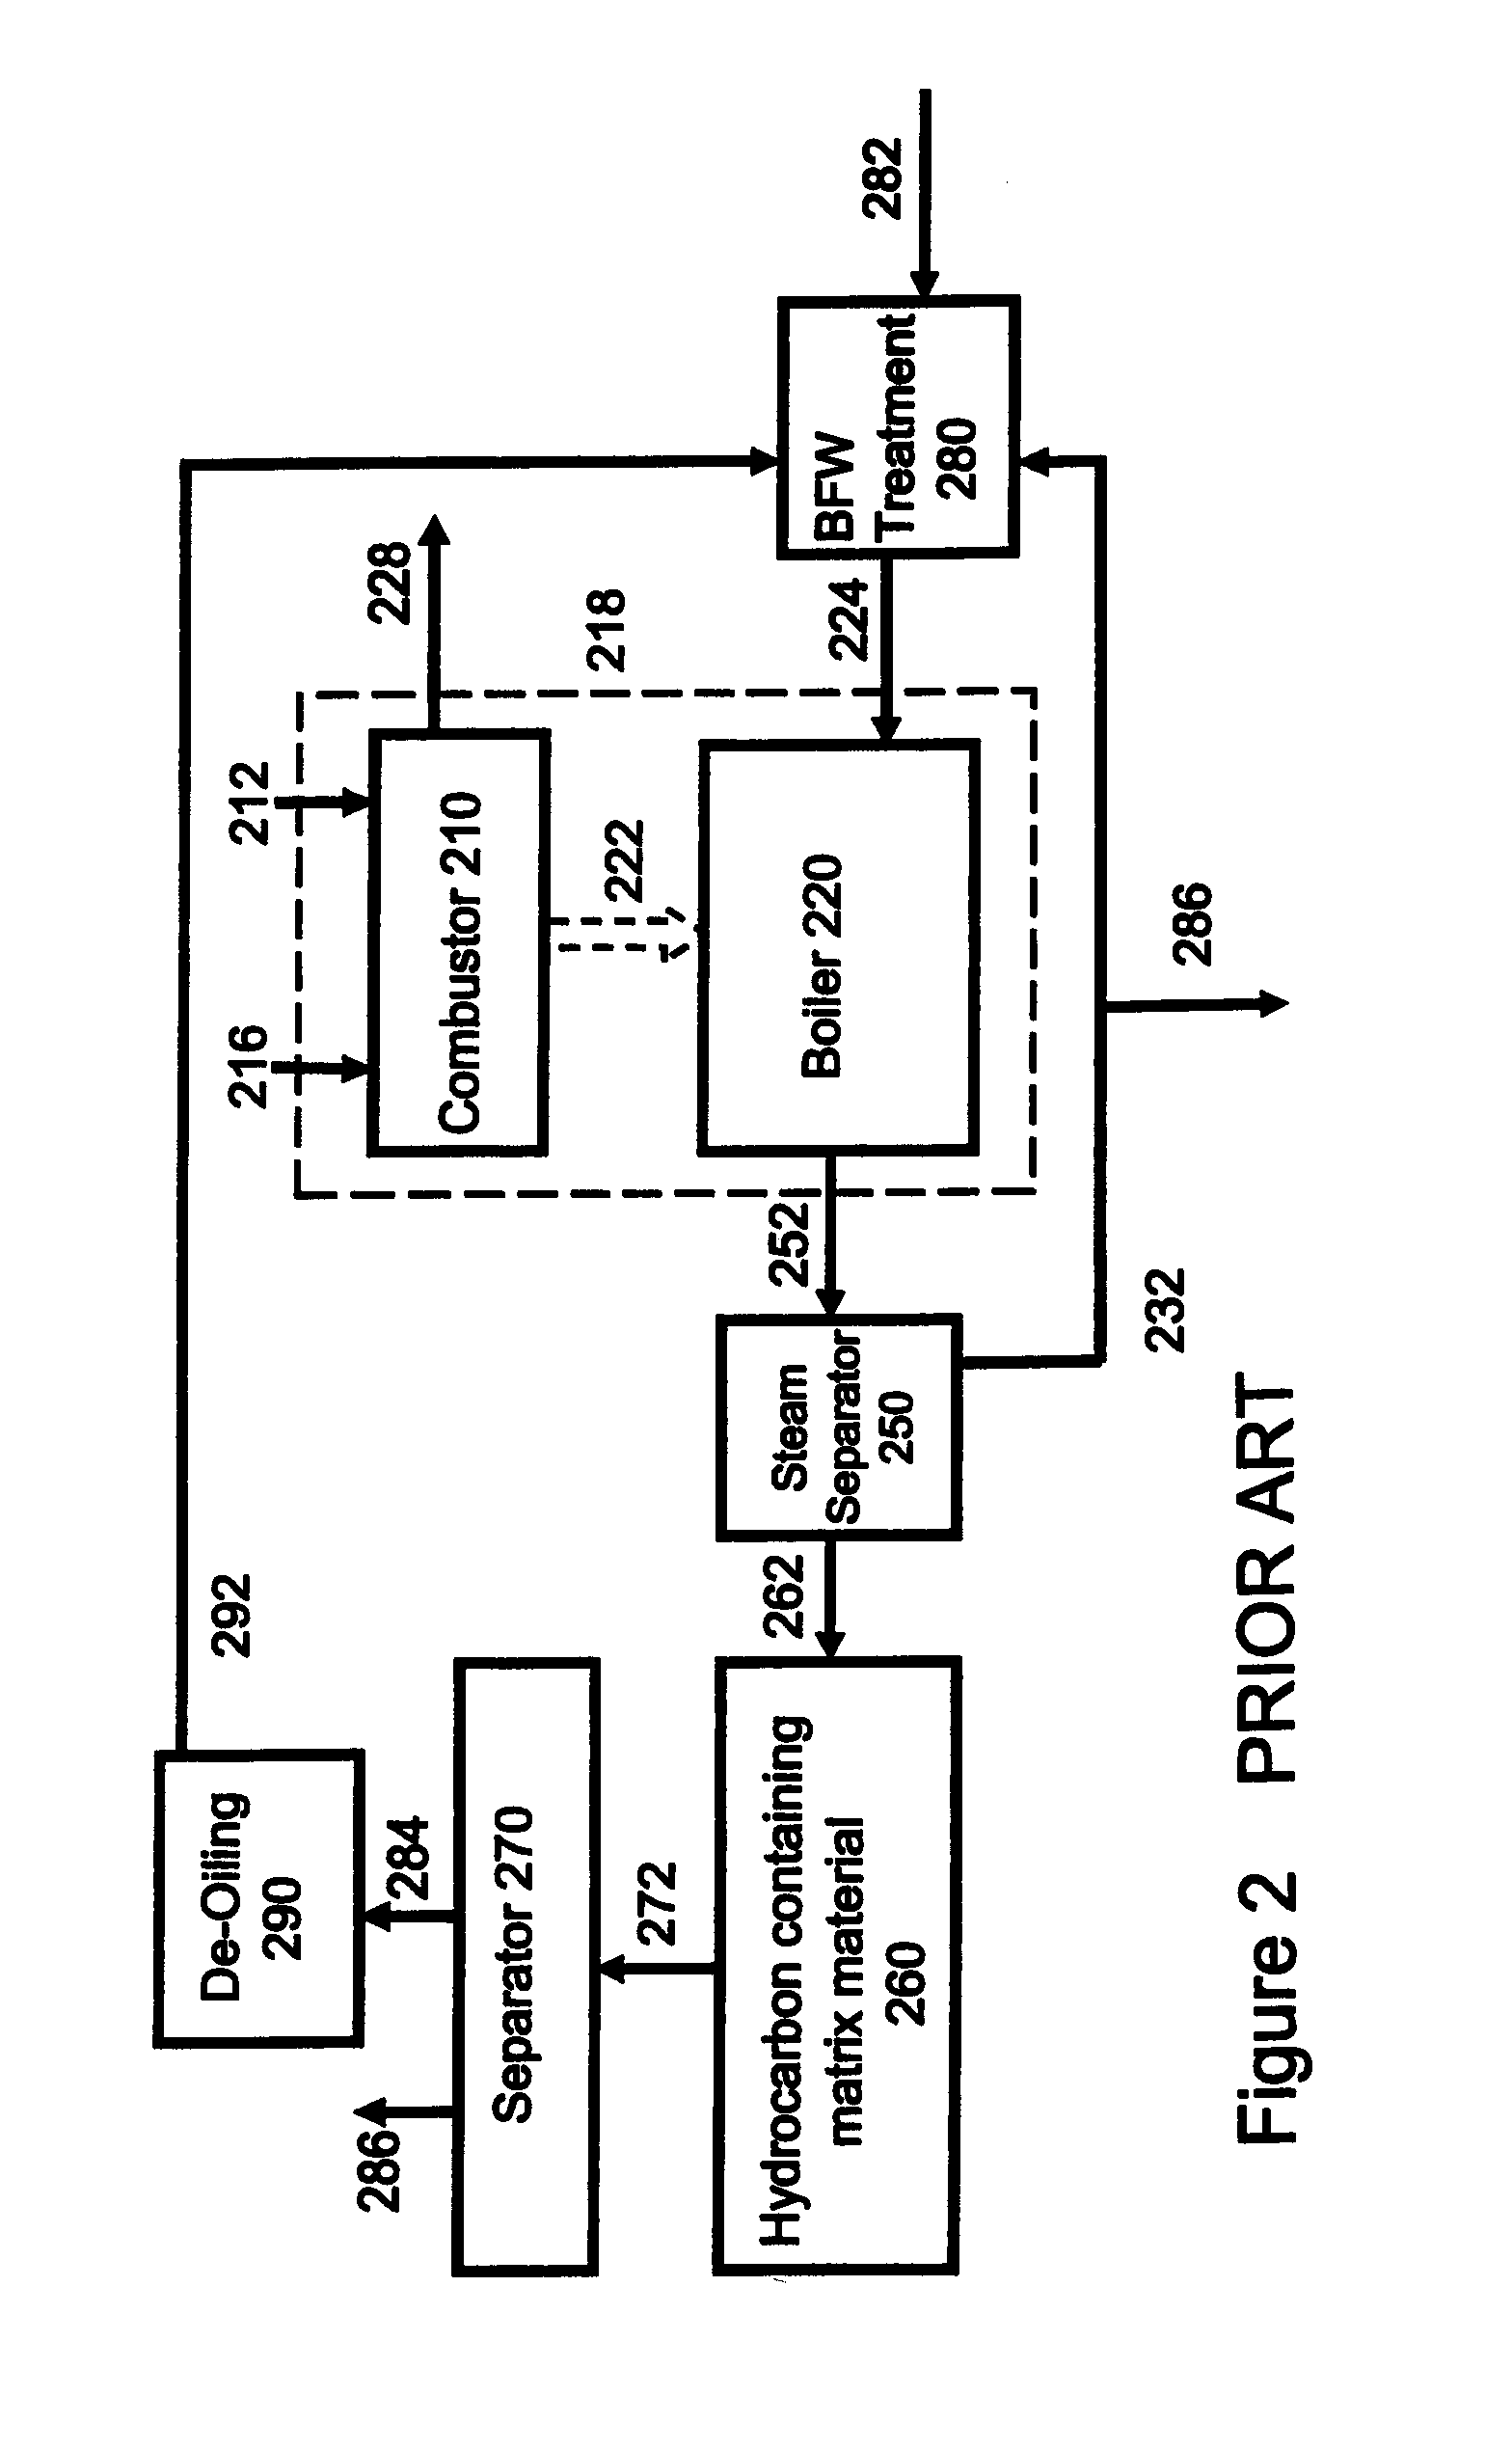 Systems and Methods for Low Emission Hydrocarbon Recovery